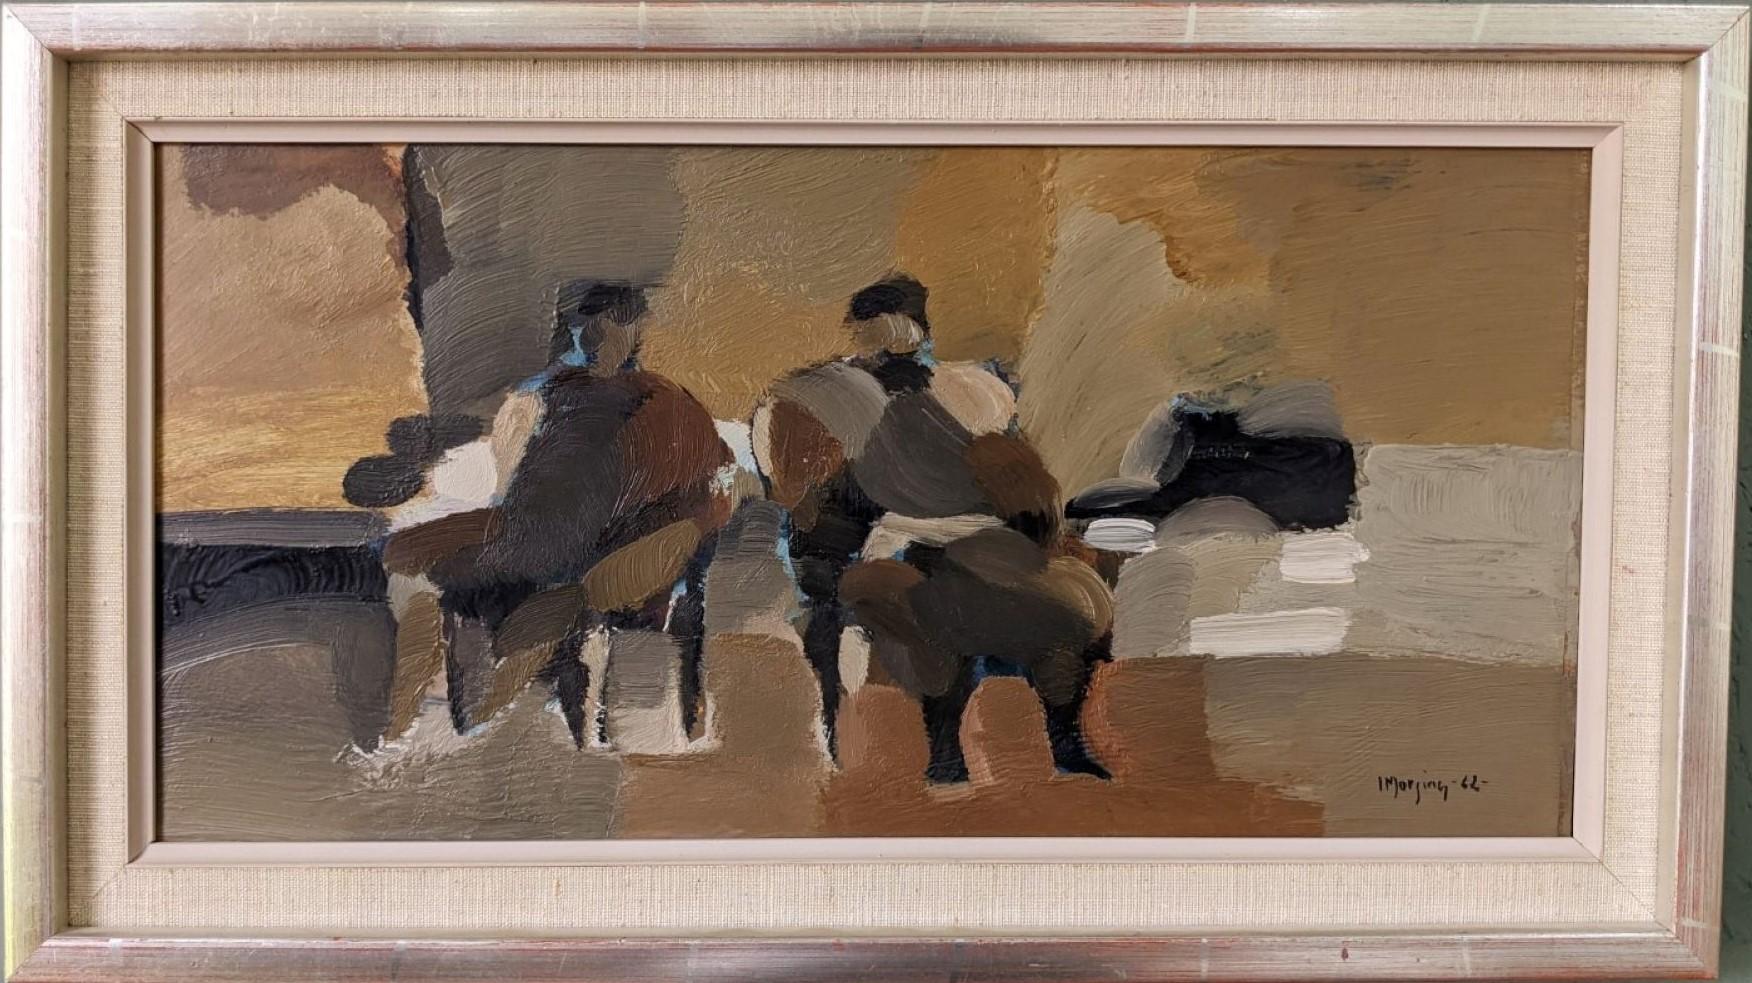 Ivar Morsing Figurative Painting - 1962 Vintage Swedish Figurative Abstract Oil Painting  - Two Seated Figures